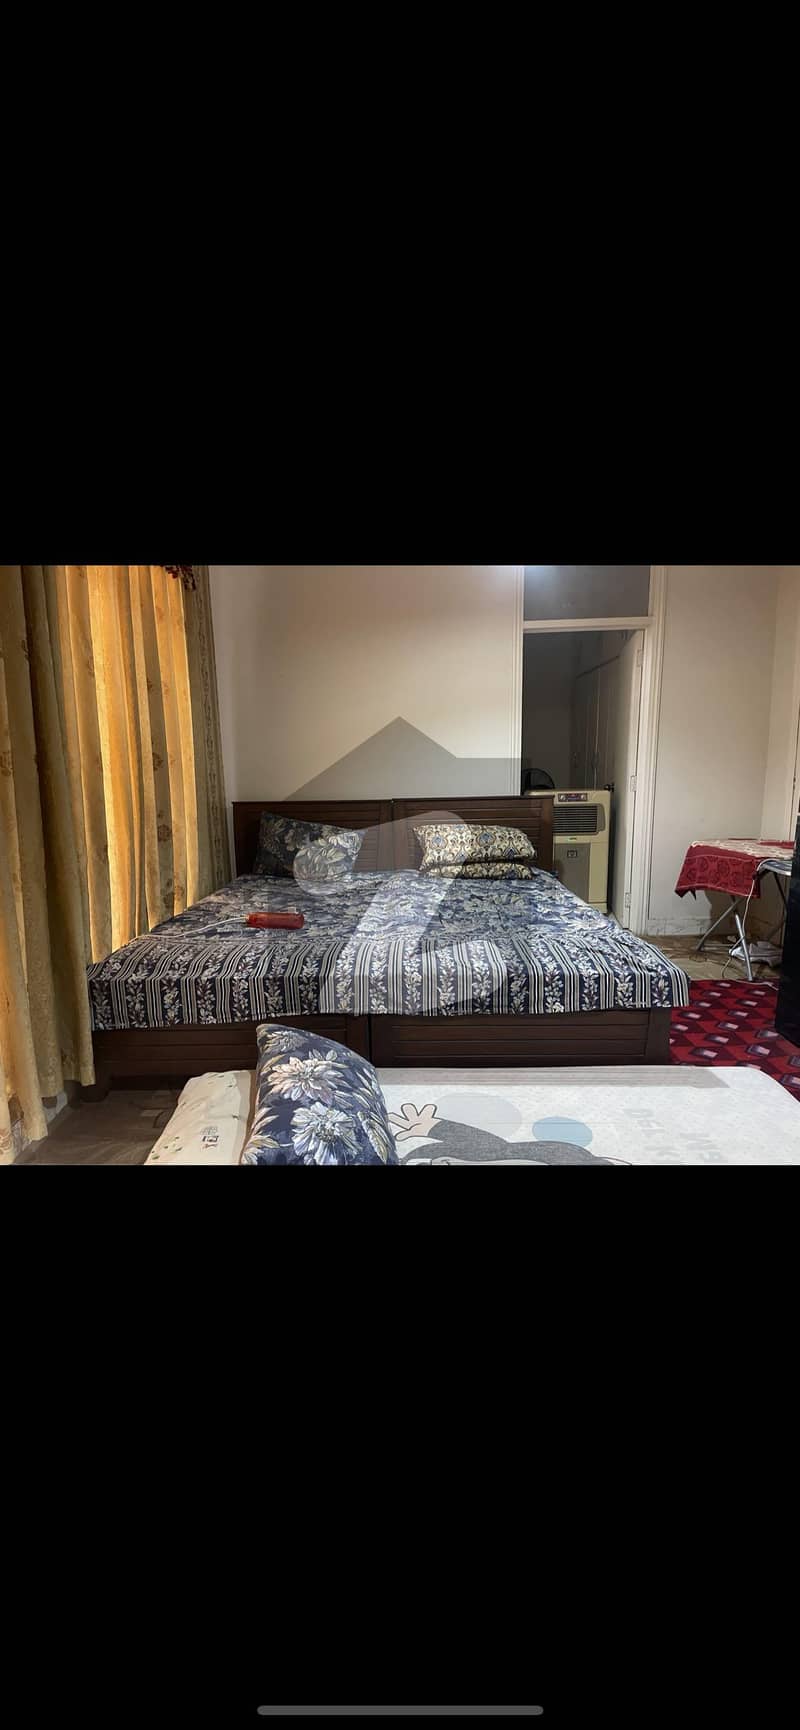 Furnished room available